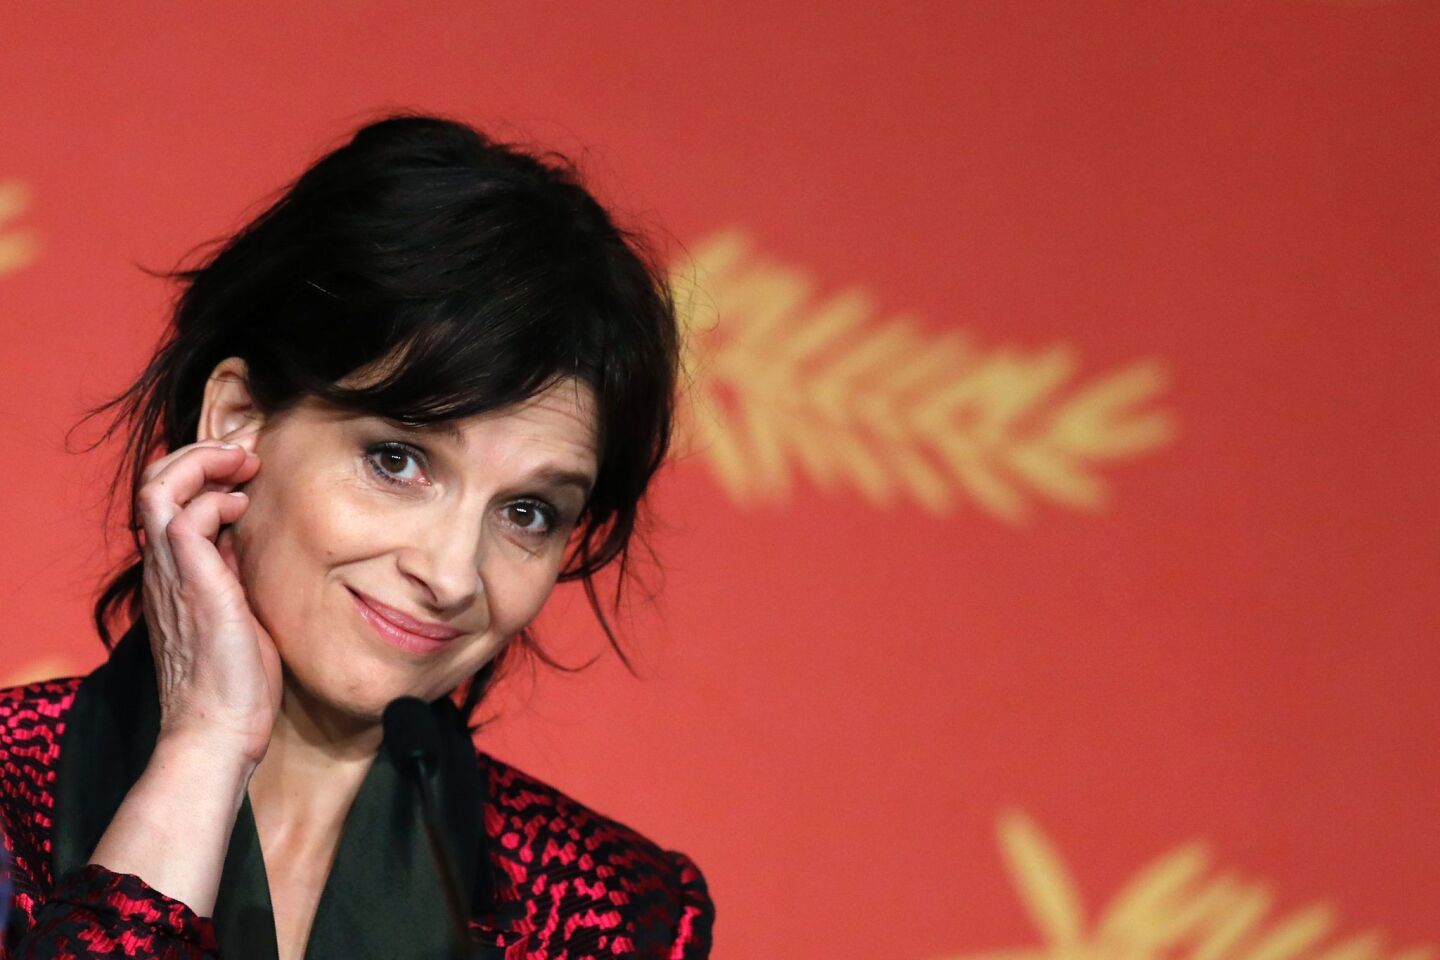 Juliette Binoche smiles during a Cannes Film Festival news conference for "Ma Loute (Slack Bay)" on May 13.